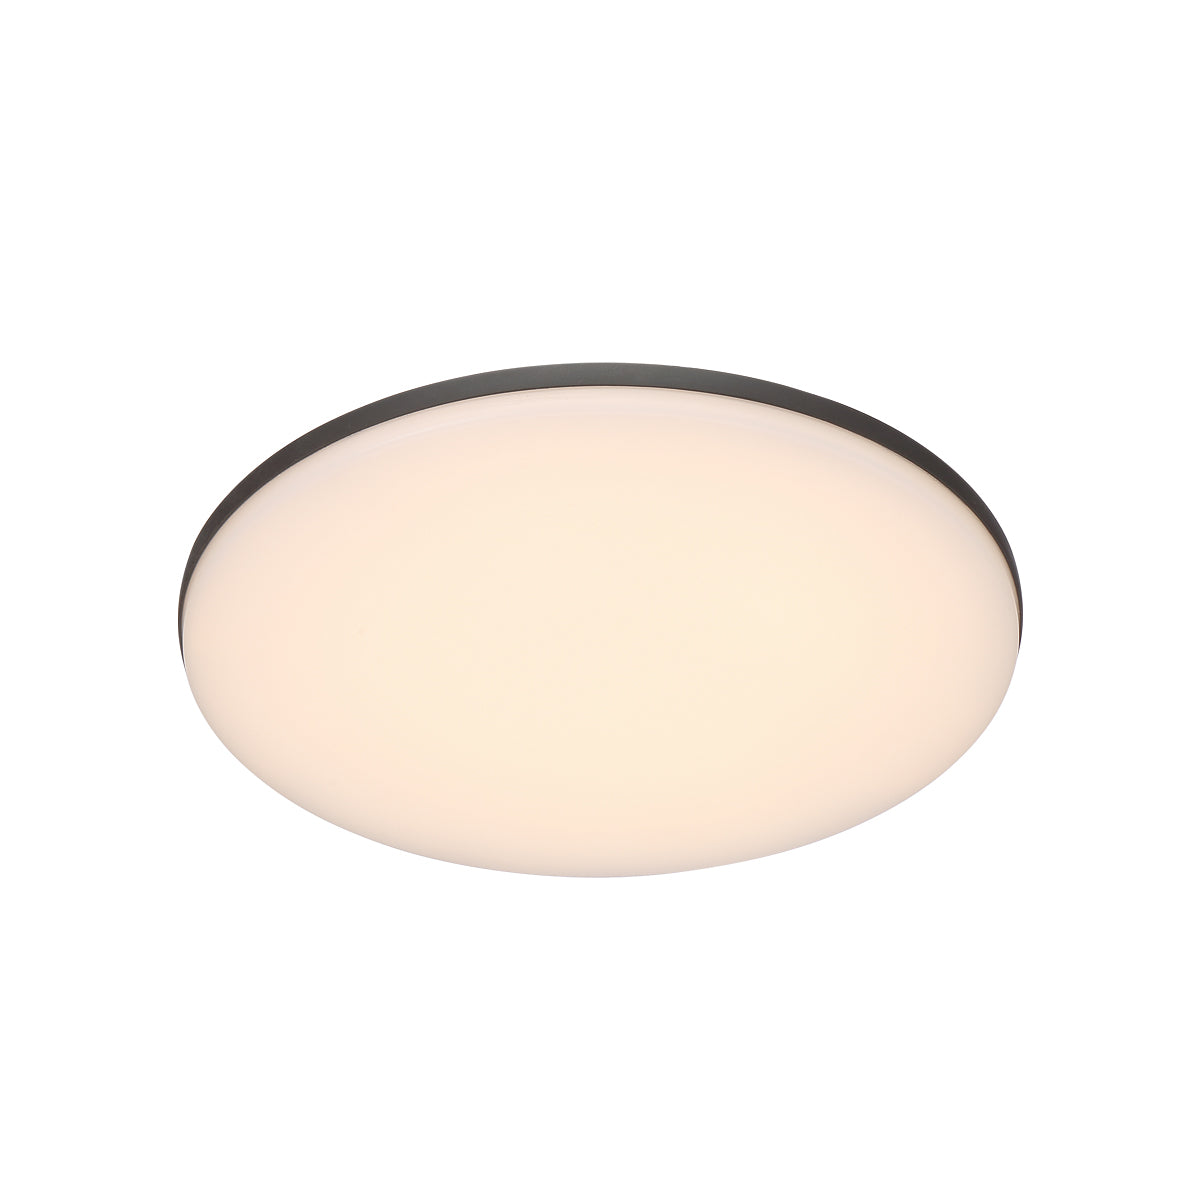 34118 Outdoor sconce Aluminum - 34118-016 INTEGRATED LED | EUROFASE